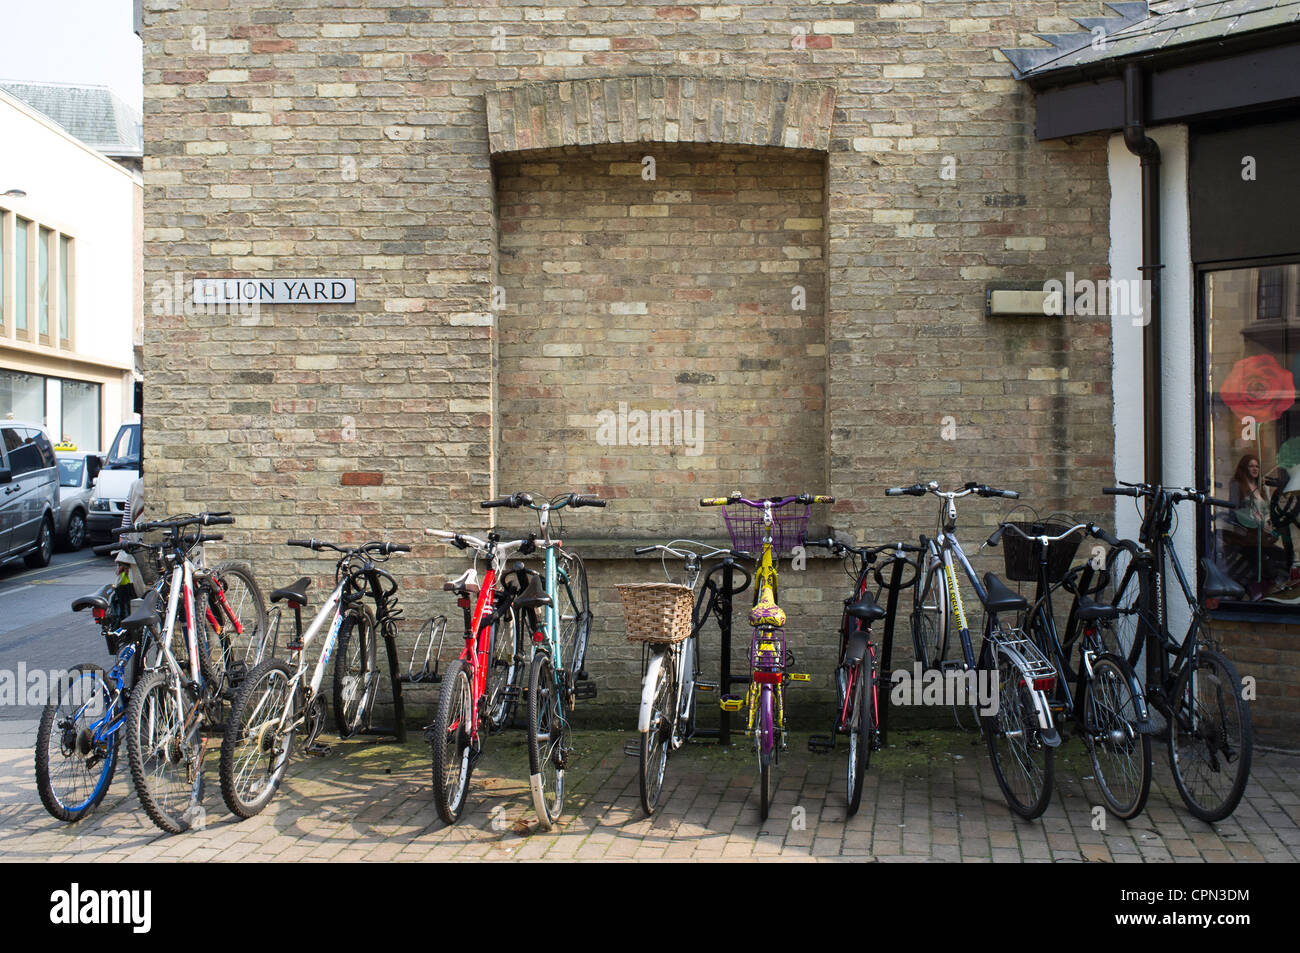 Cycles in a cycle rack in a Cambridge High Street Stock Photo